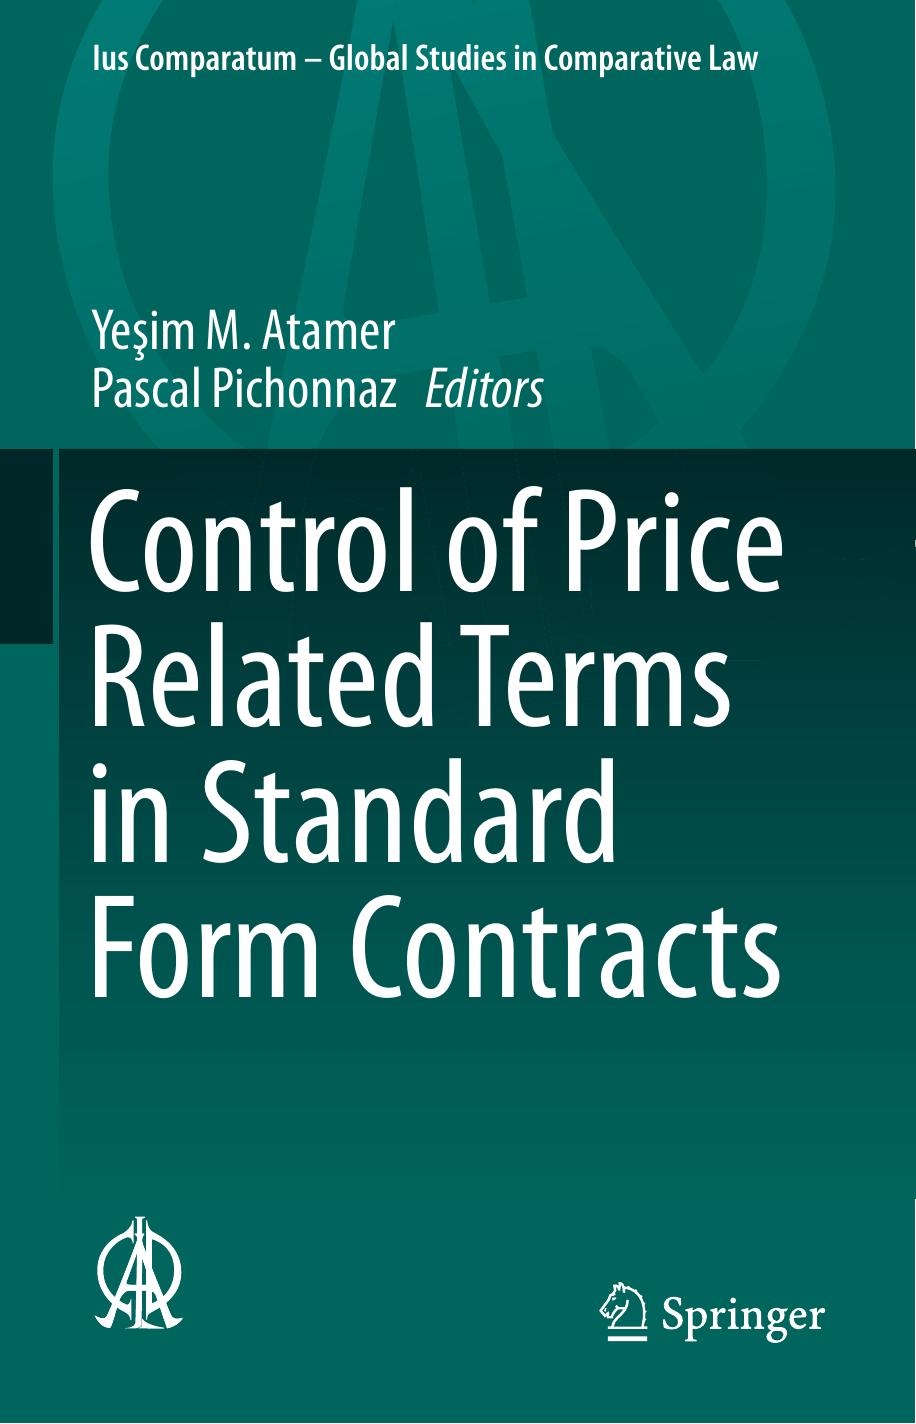 Control of Price Related Terms in Standard Form Contracts by Yeşim M. Atamer, Pascal Pichonnaz 2020